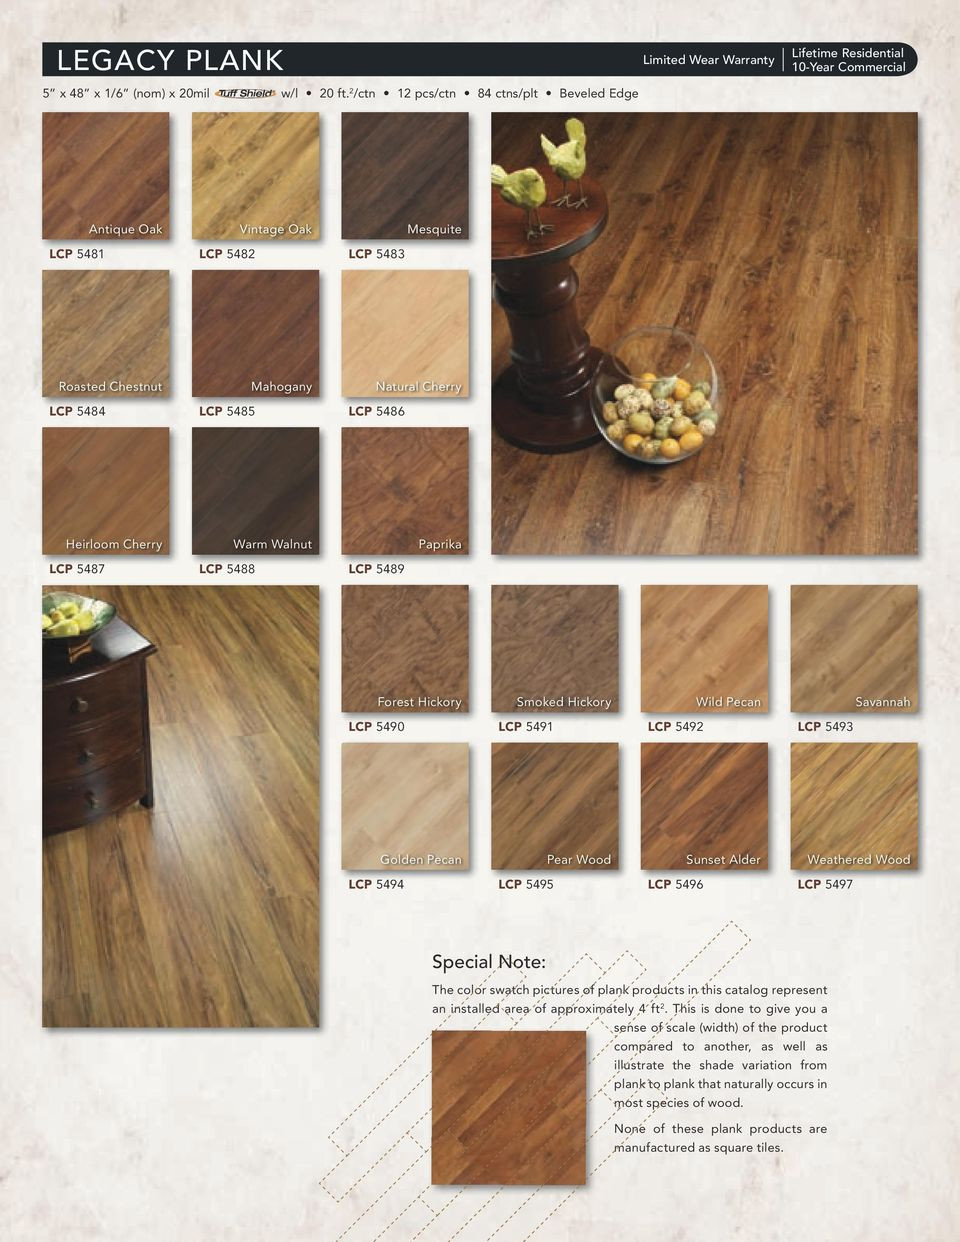 13 Fabulous Hardwood Floor Refinishing Boulder Co 2024 free download hardwood floor refinishing boulder co of luxury vinyl tile plank pdf regarding heirloom cherry warm walnut paprika lcp 5487 lcp 5488 lcp 5489 forest hickory smoked hickory wild